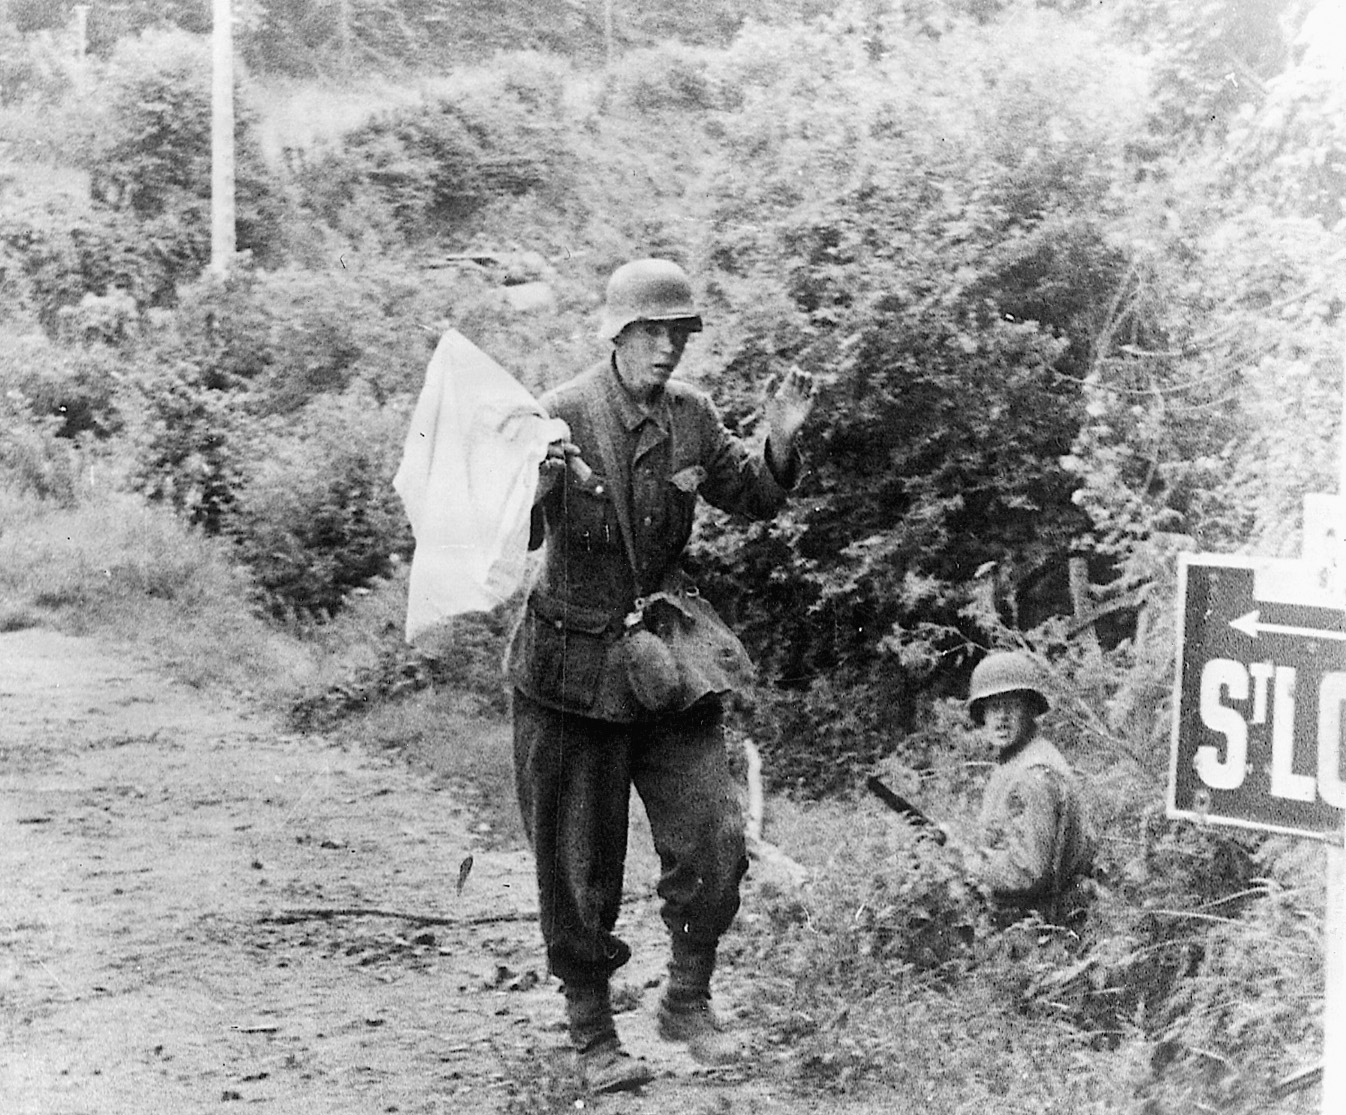 With an American soldier covering his movement, a German soldier surrenders to U.S. forces outside St. Lô.